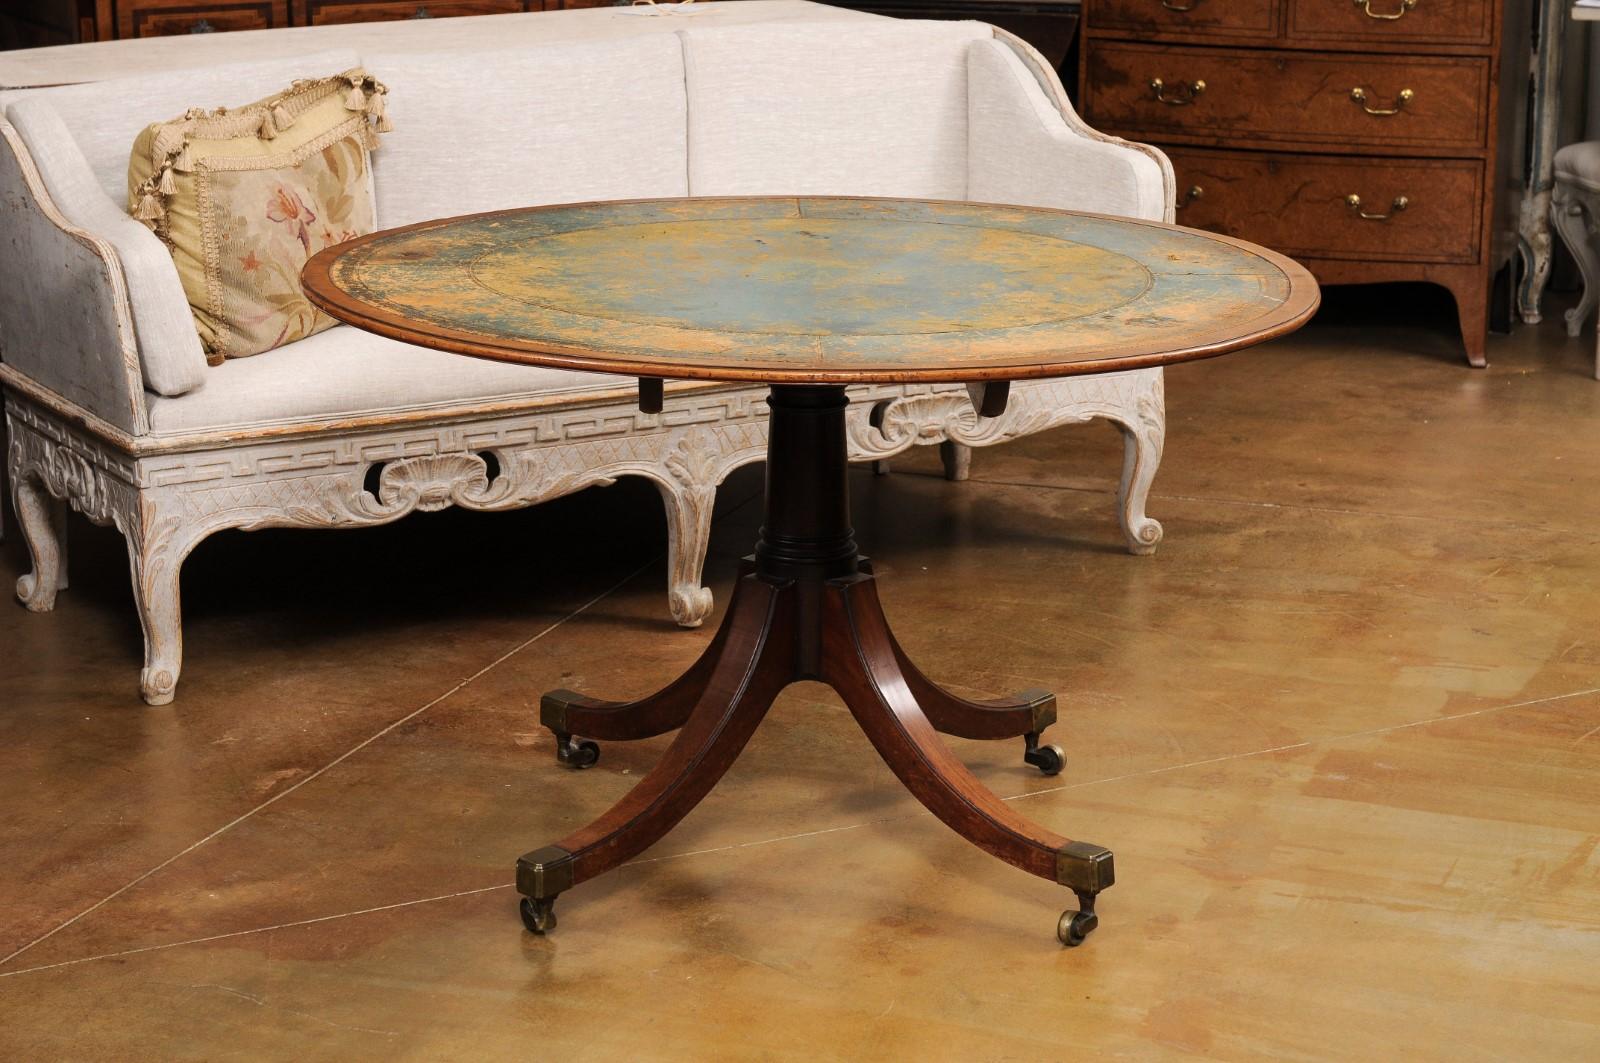 English Turn of the Century Mahogany Tilt Top Center Table with Leather Top For Sale 1